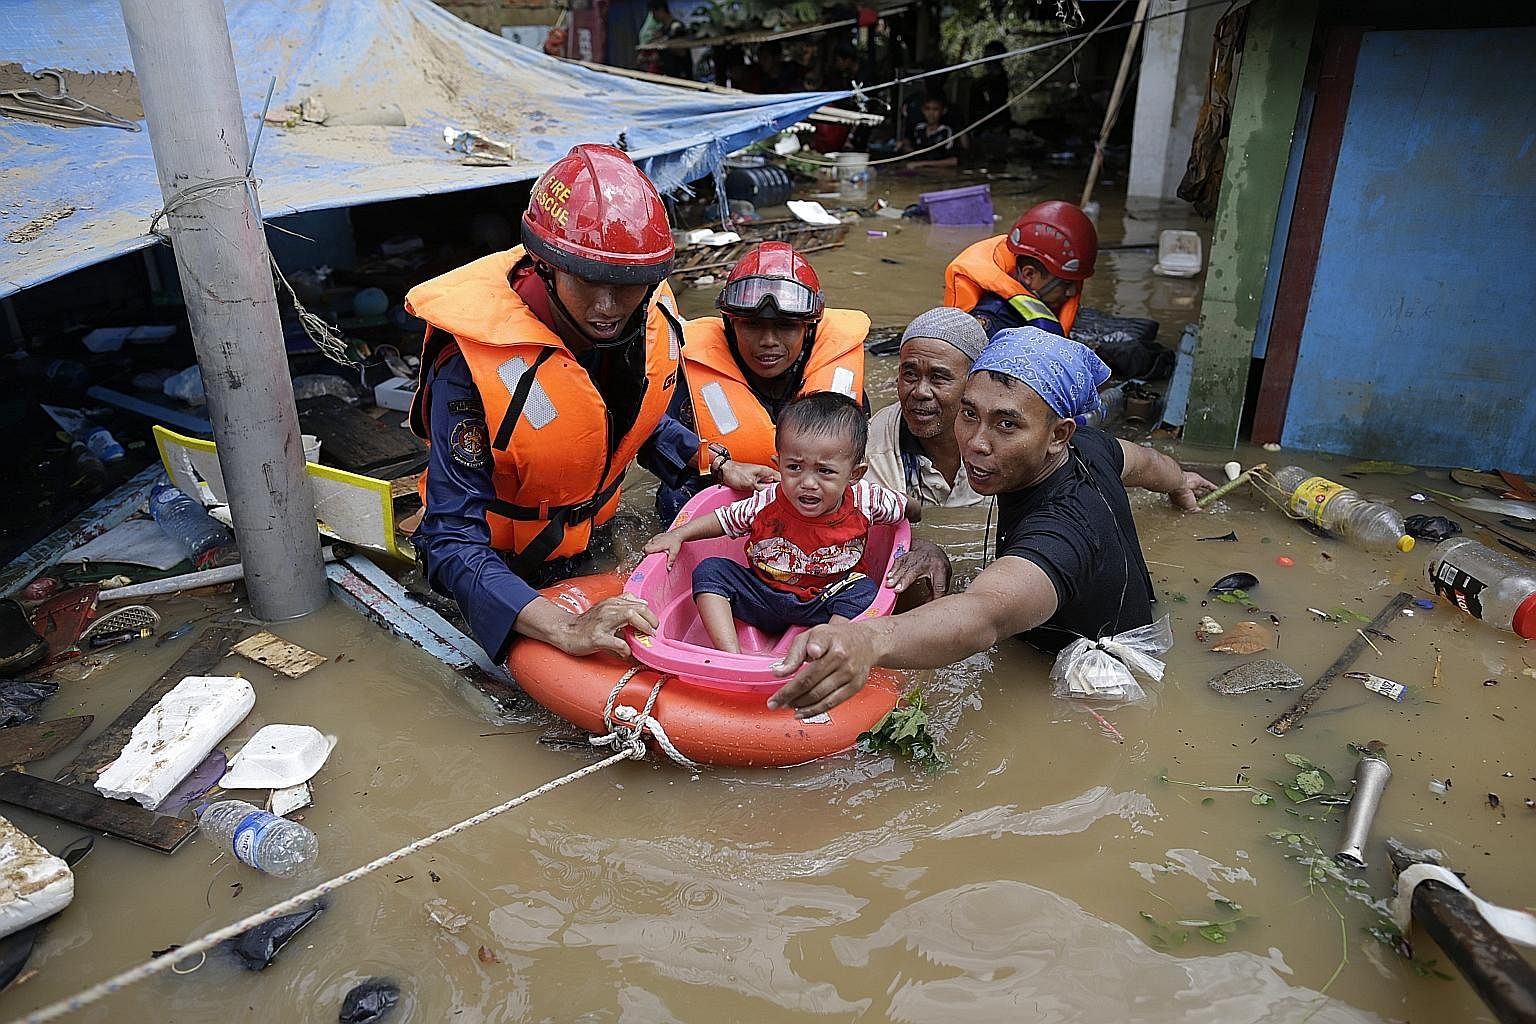 Indonesian rescuers evacuating a boy from a flooded area in Jakarta yesterday. Severe flooding and landslides caused by torrential rain over the New Year period have killed at least 26 people and left thousands more in the Indonesian capital and its 